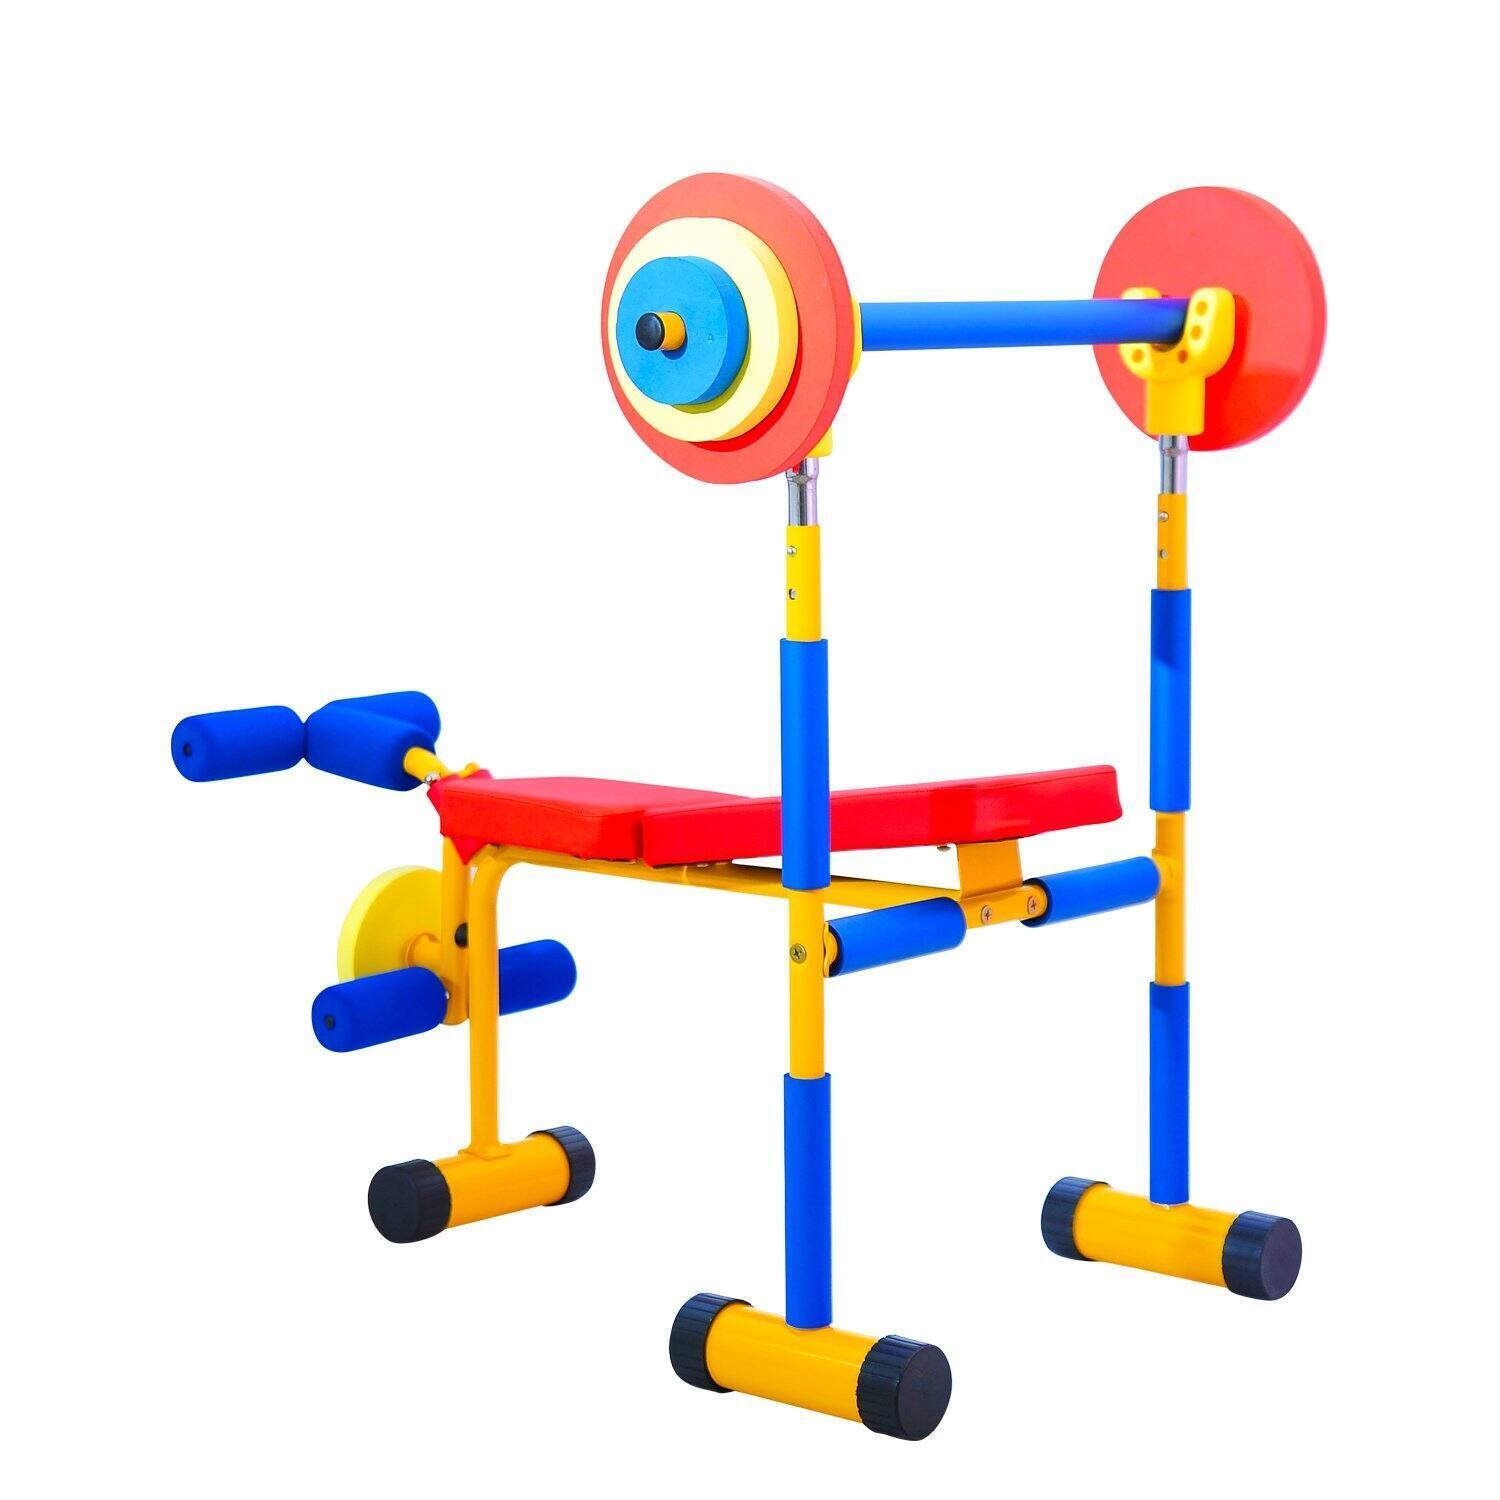 Weightlifting Exercise Equipment for Kids